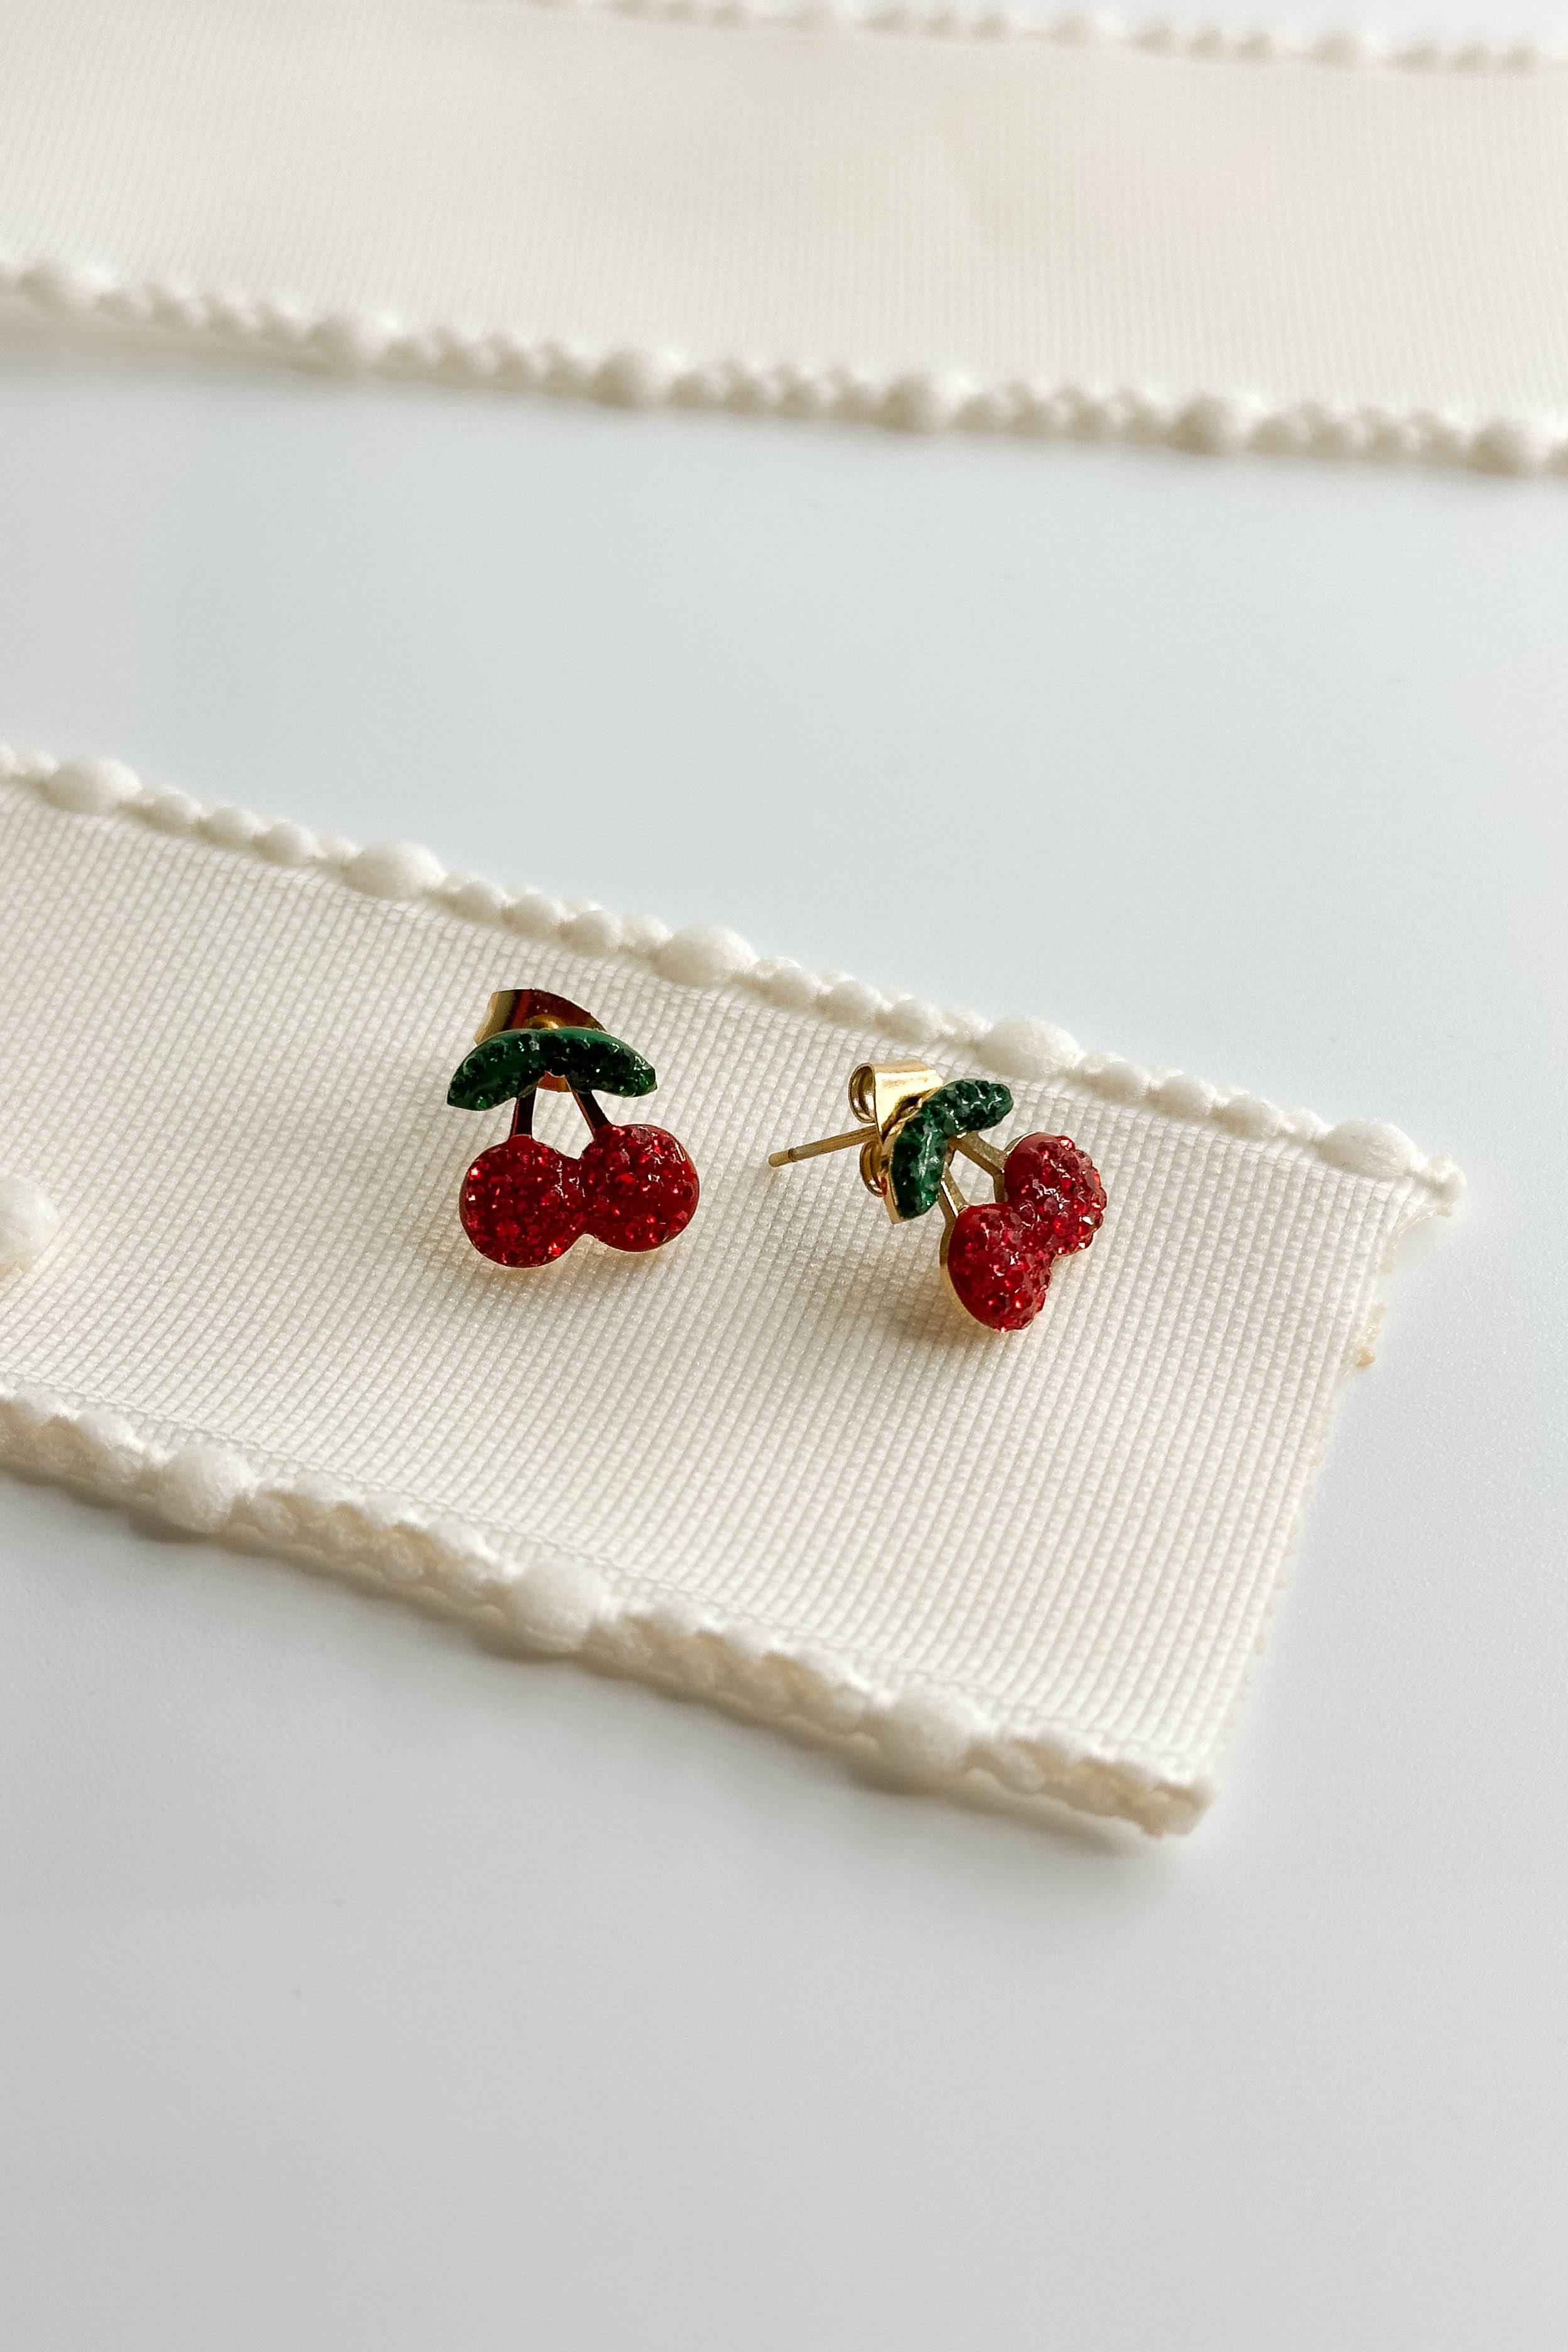 Image shows the Penelope Cherry Stud Earrings against a white background. Each earring has two red cherries with two green leaves, made from rhinestones on stud background